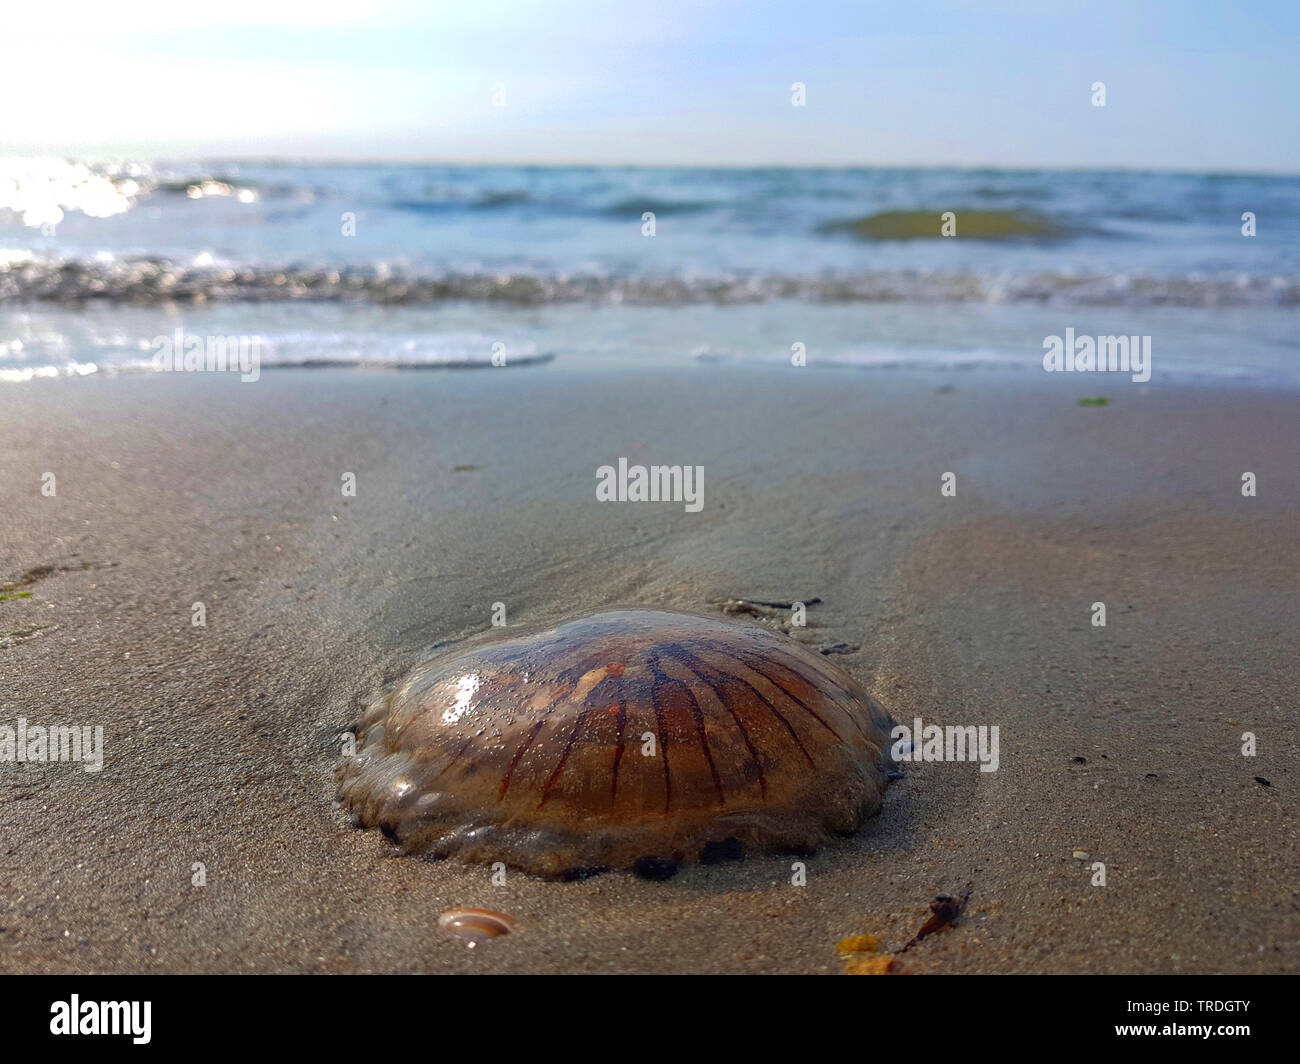 compass jellyfish, red-banded jellyfish (Chrysaora hysoscella), washed up on the beach, Netherlands Stock Photo